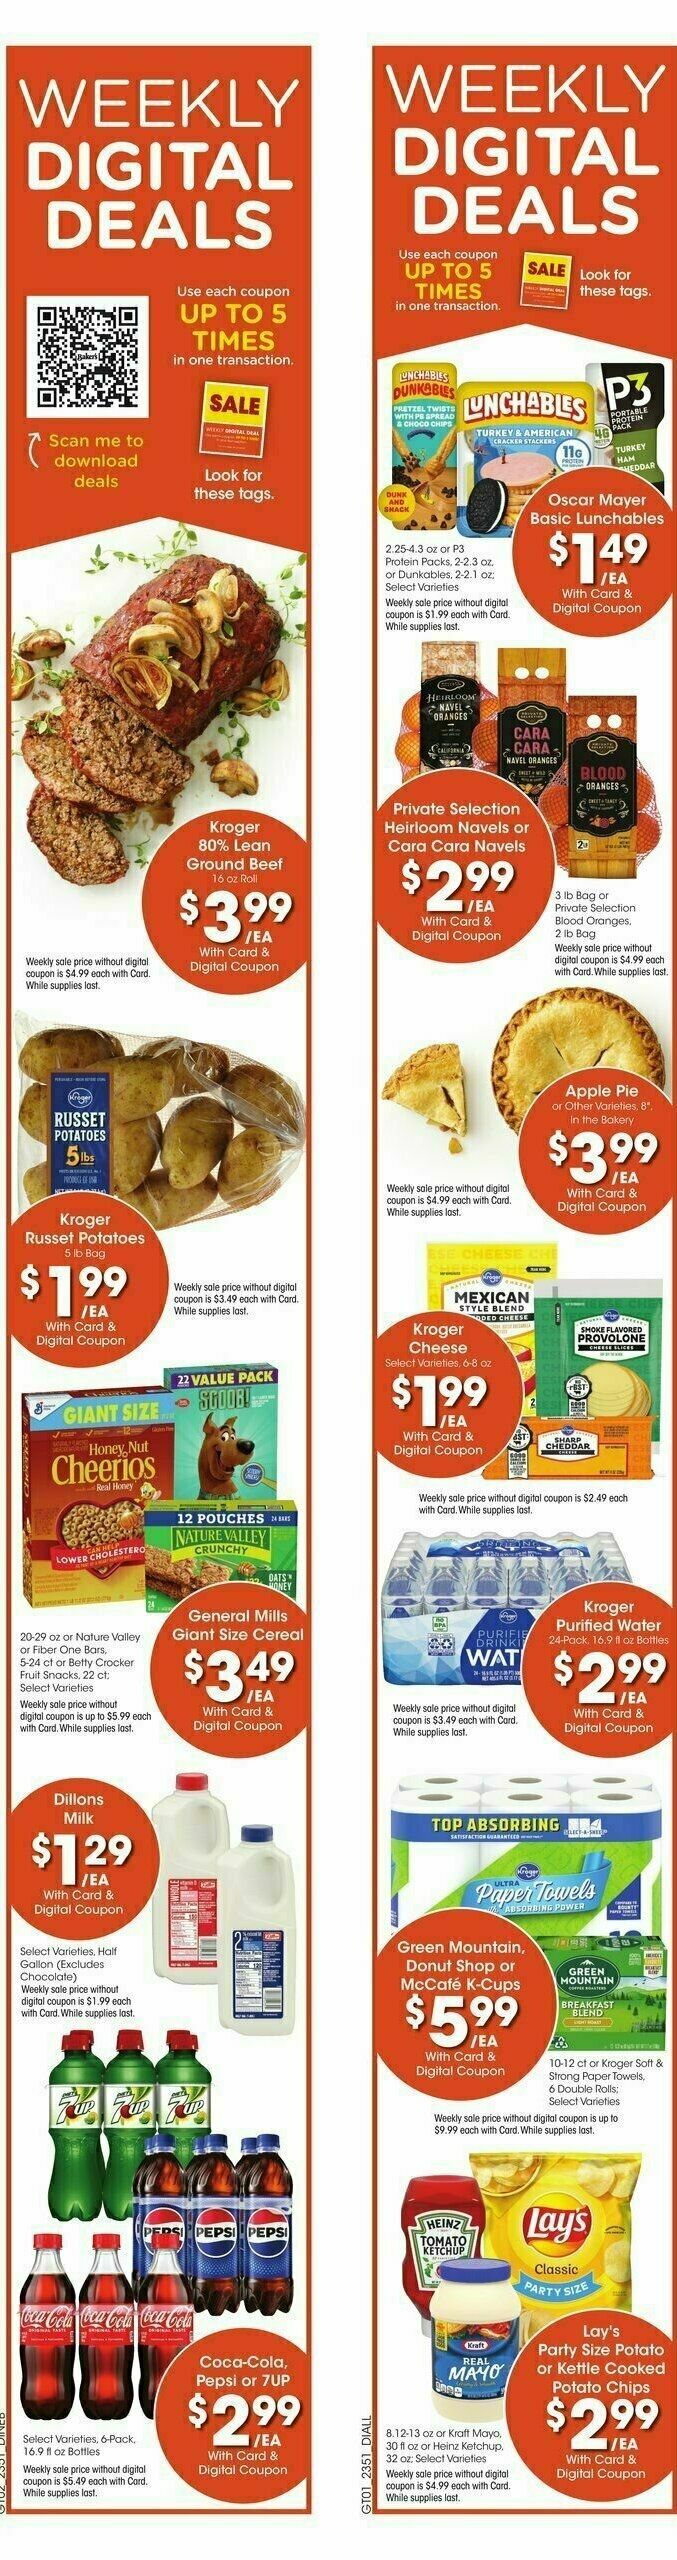 Baker's Weekly Ad from January 17